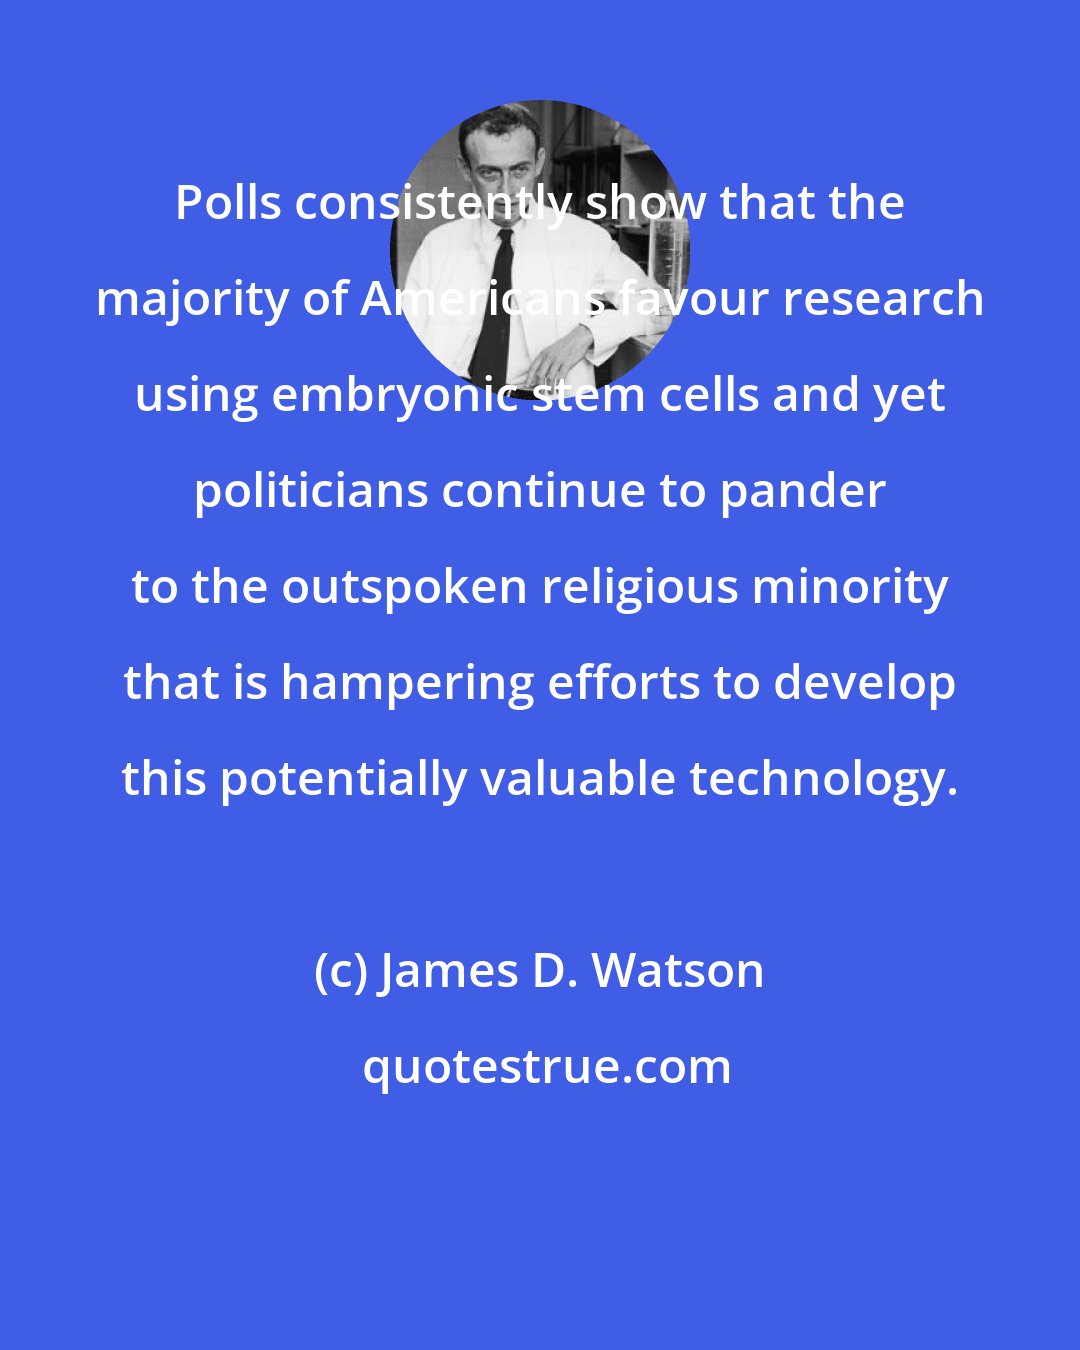 James D. Watson: Polls consistently show that the majority of Americans favour research using embryonic stem cells and yet politicians continue to pander to the outspoken religious minority that is hampering efforts to develop this potentially valuable technology.